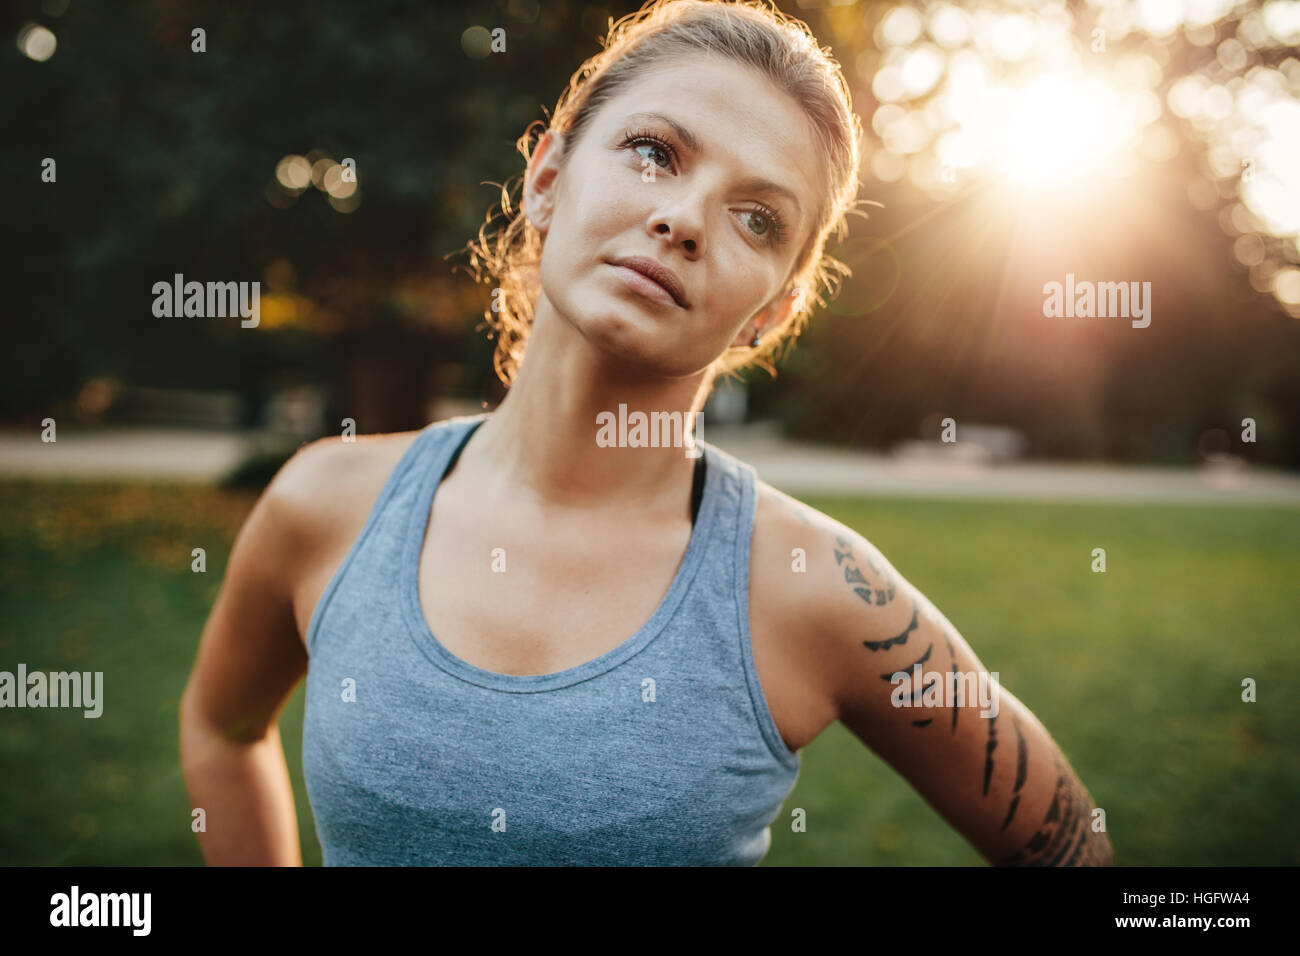 Close up portrait of fit woman standing outdoors and looking away. Confident fitness model in park. Stock Photo